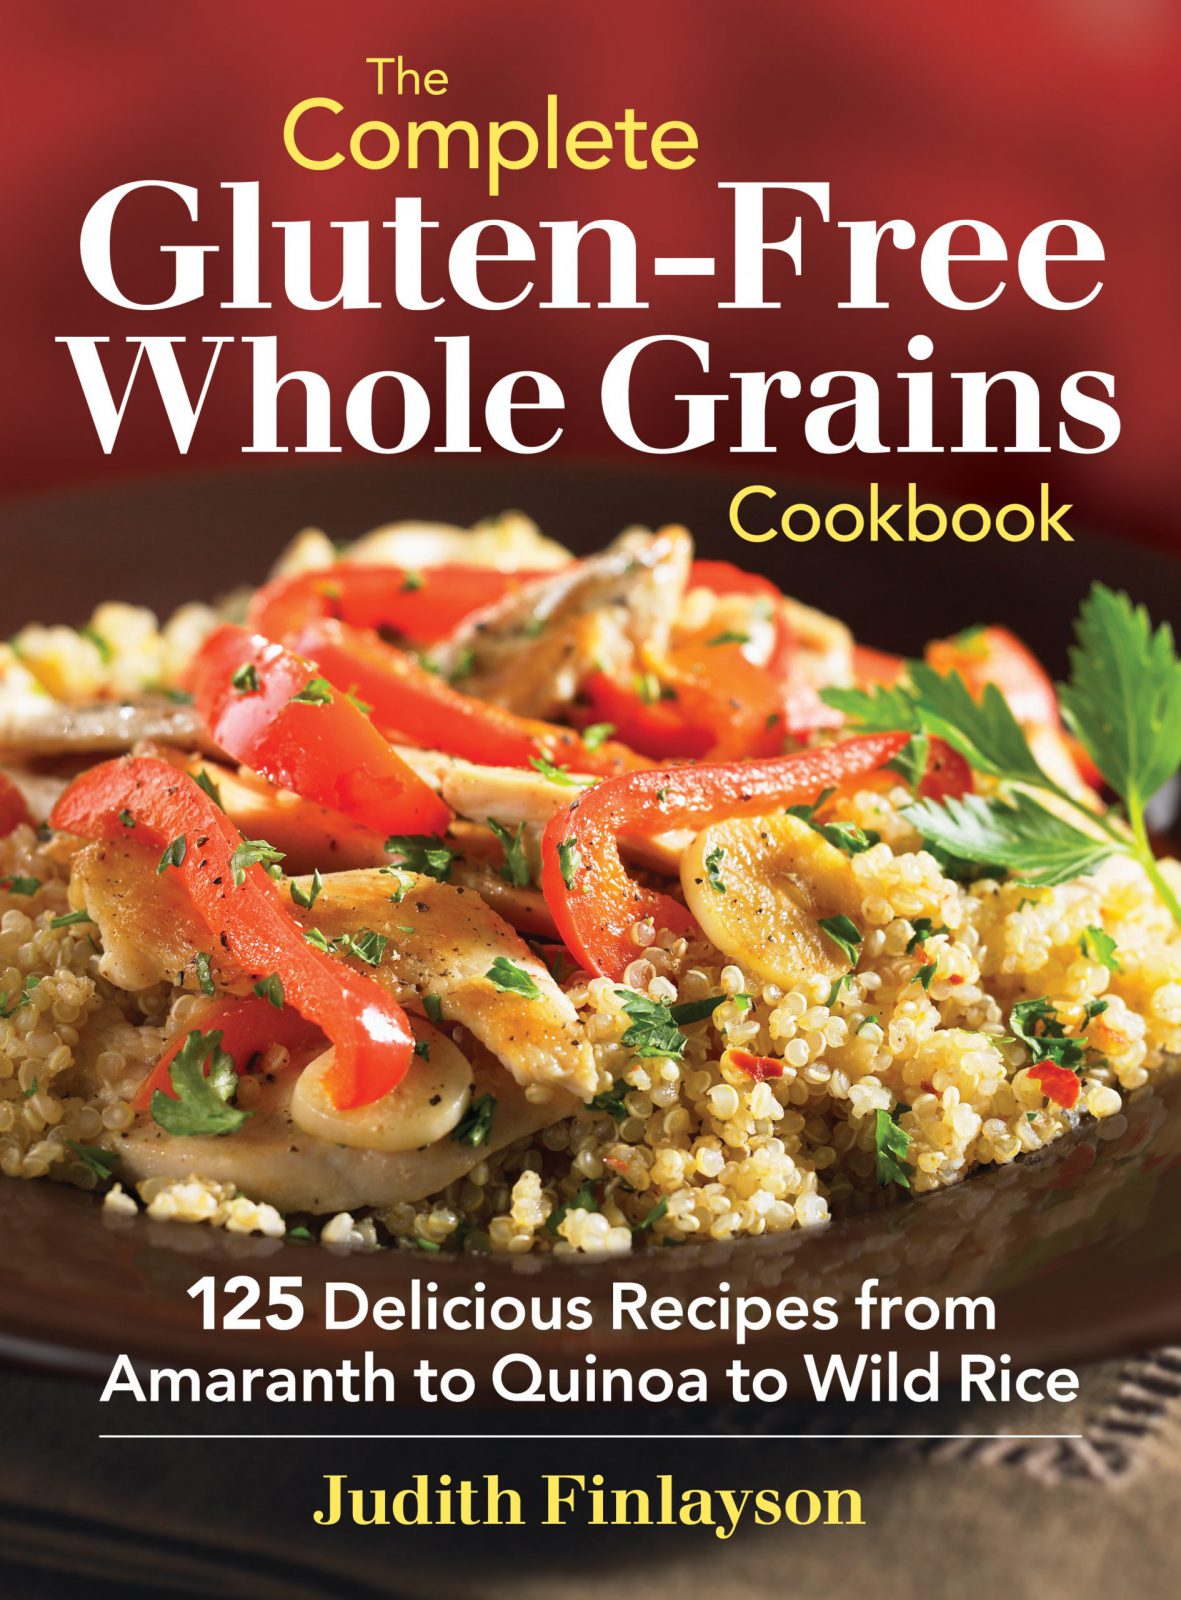 The Complete Gluten-Free Whole Grains Cookbook